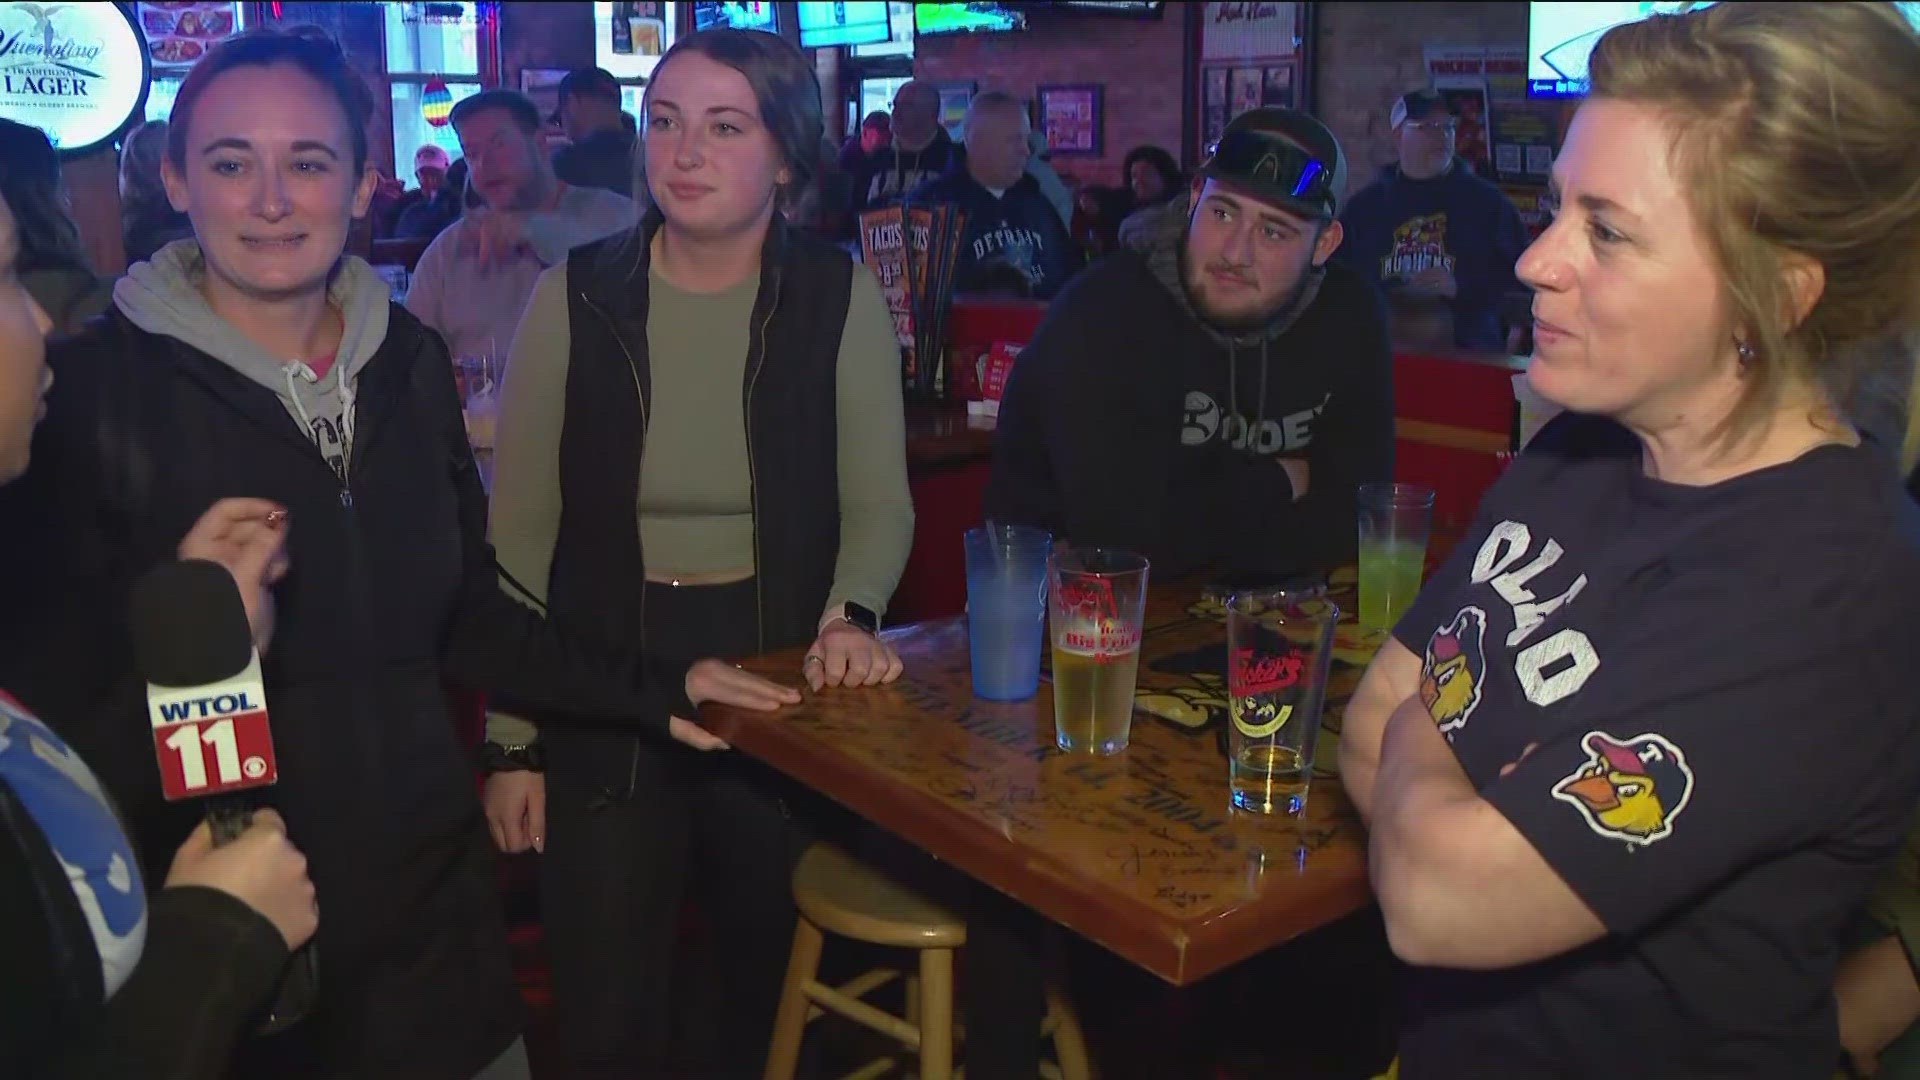 Opening Day 2023 may be an early pitch, but the bars are busy at noon. The WTOL 11 News team has a look at everything from the field to the forecast and fans.